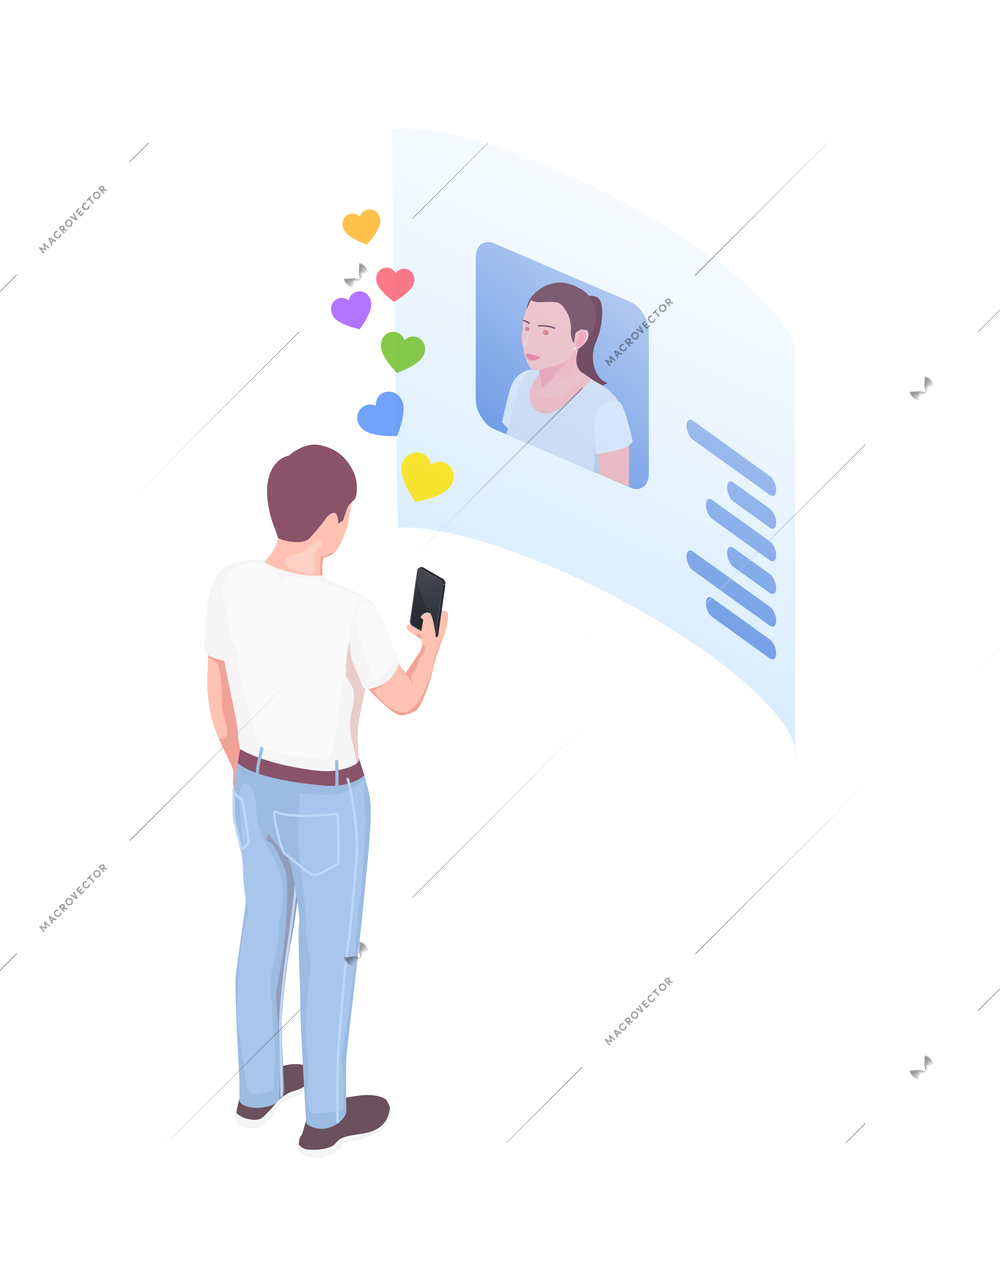 Social network isometric icons composition with character of male user upvoting female profile with heart symbols vector illustration